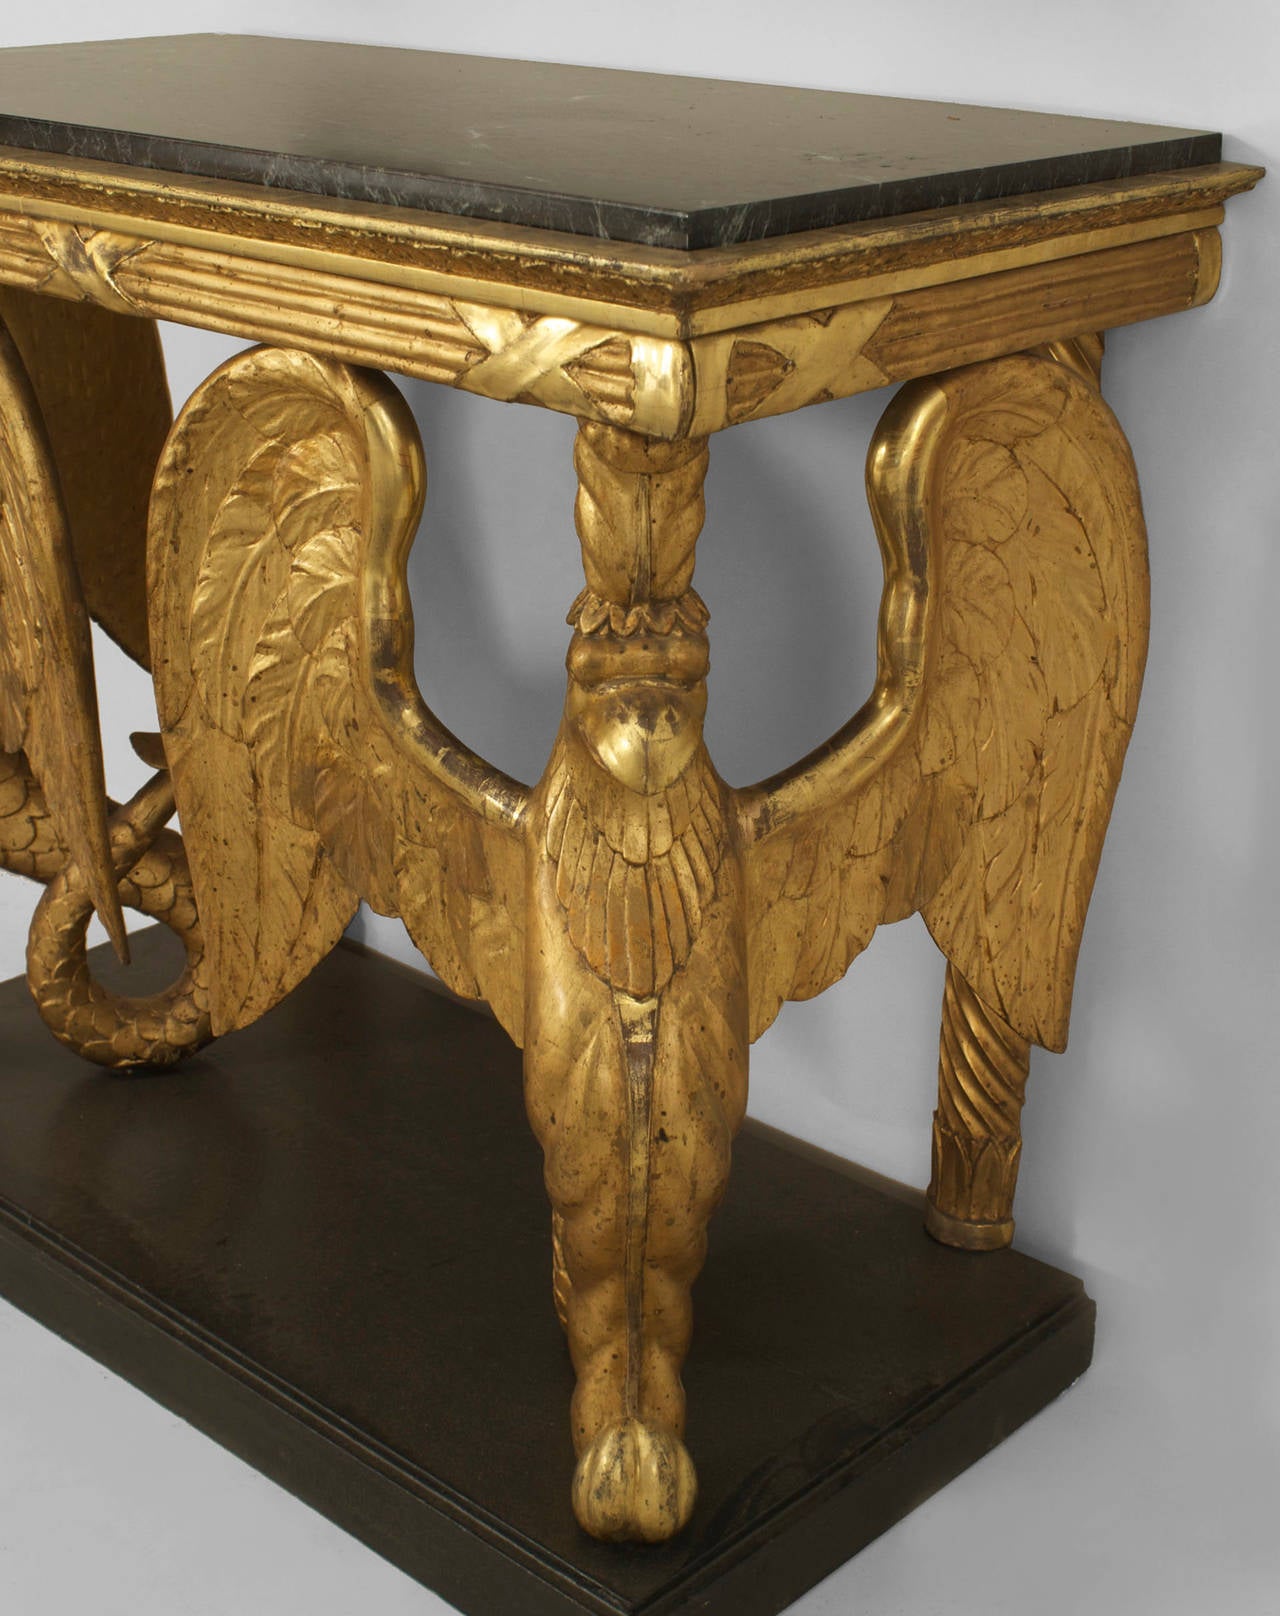 19th Century Swedish Empire Console with Gilt Griffins Beneath a Marble Top